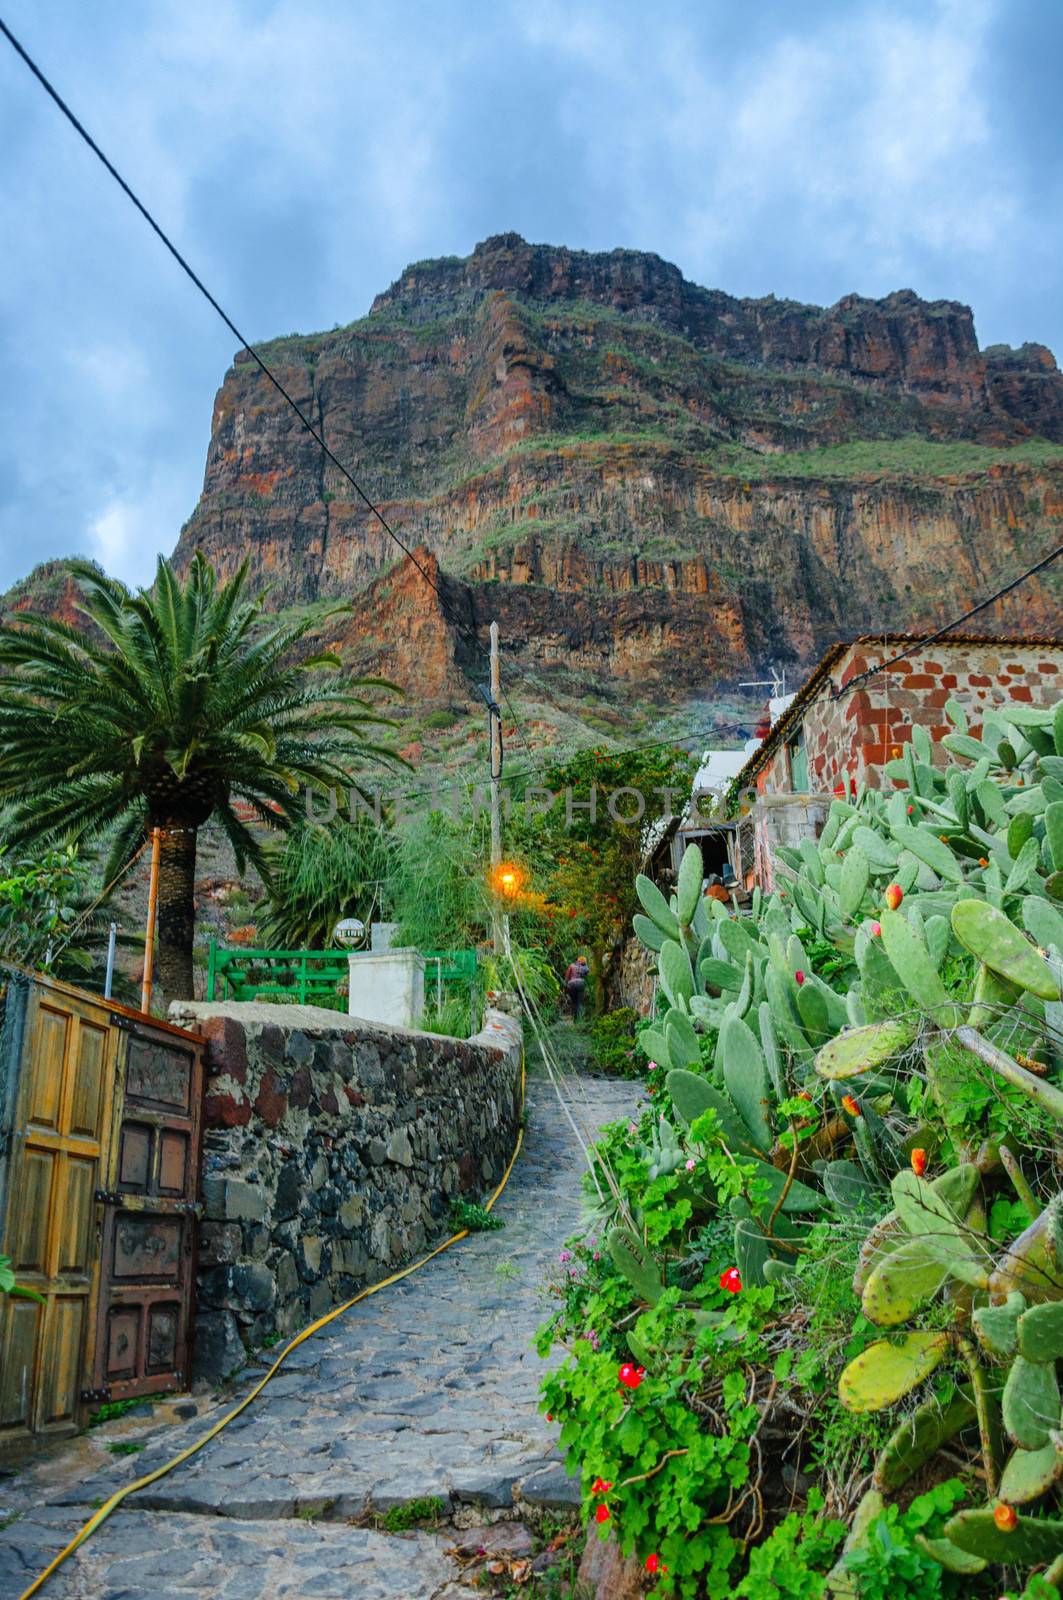 Street of Masca village with old houses, Tenerife, Canarian Islands